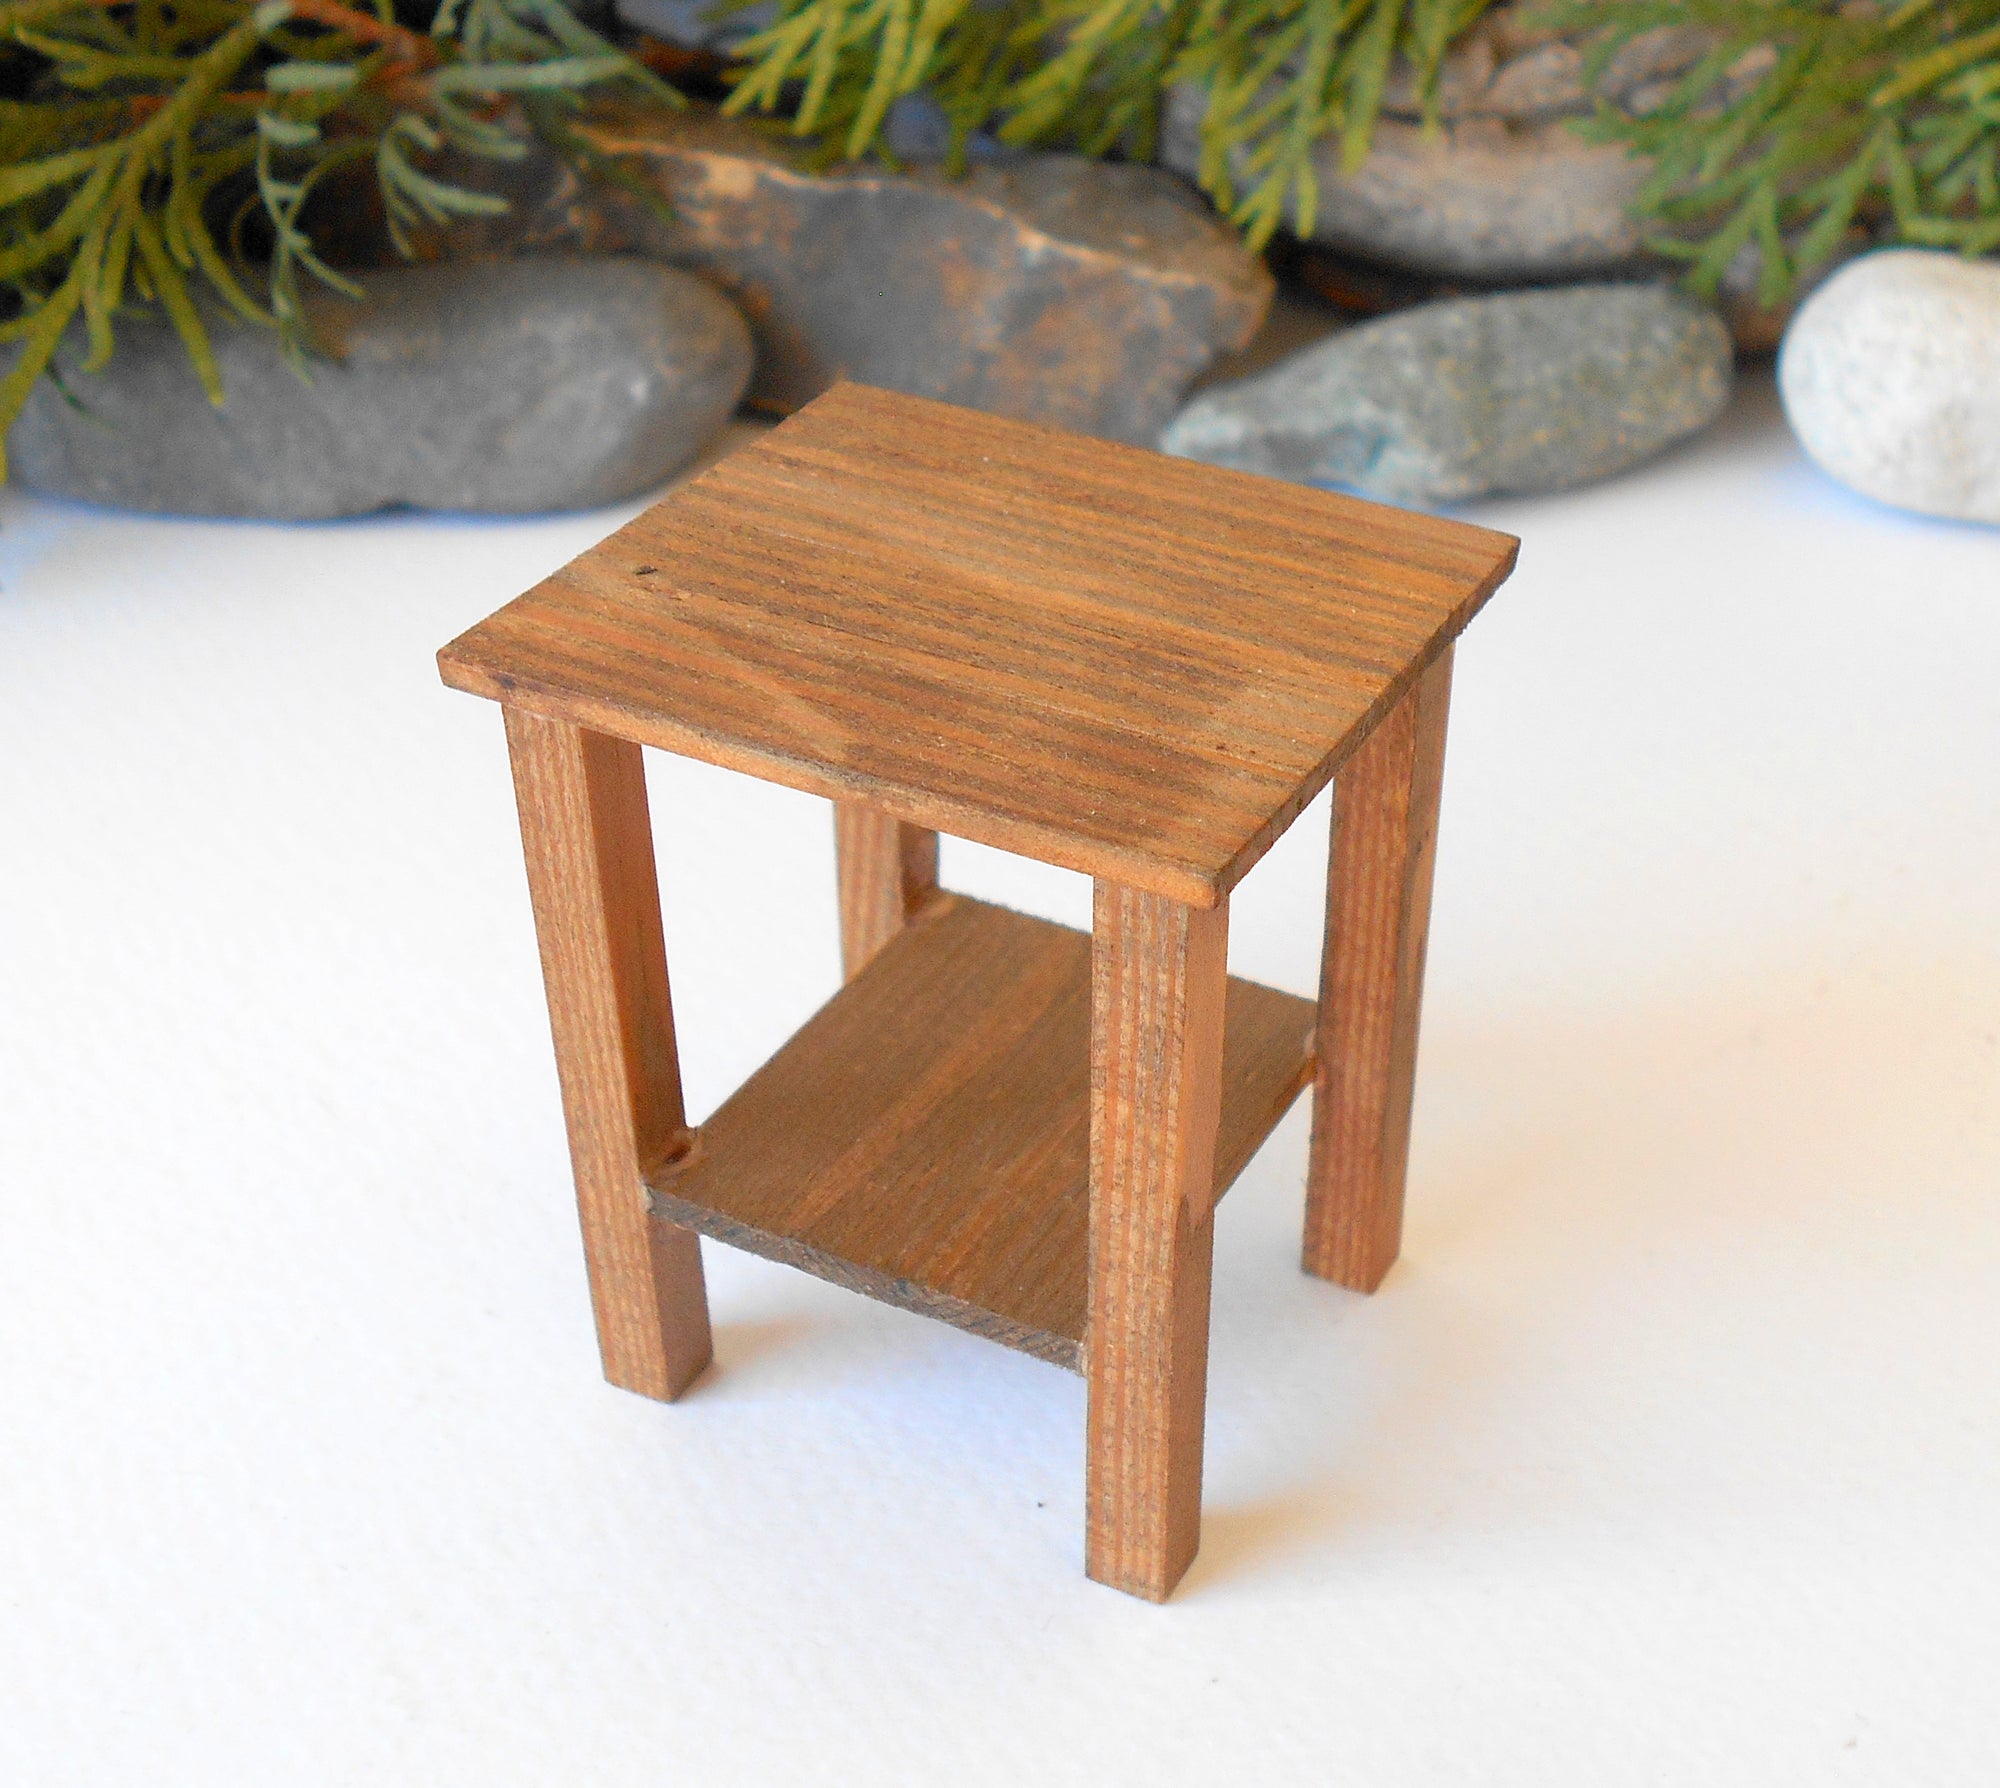 This is a Miniature nightstand or plant stand table of wooden furniture that is approximately 1/12 in scale. I have stained the mini nightstand with an Italian eco-friendly mordant in light brown.